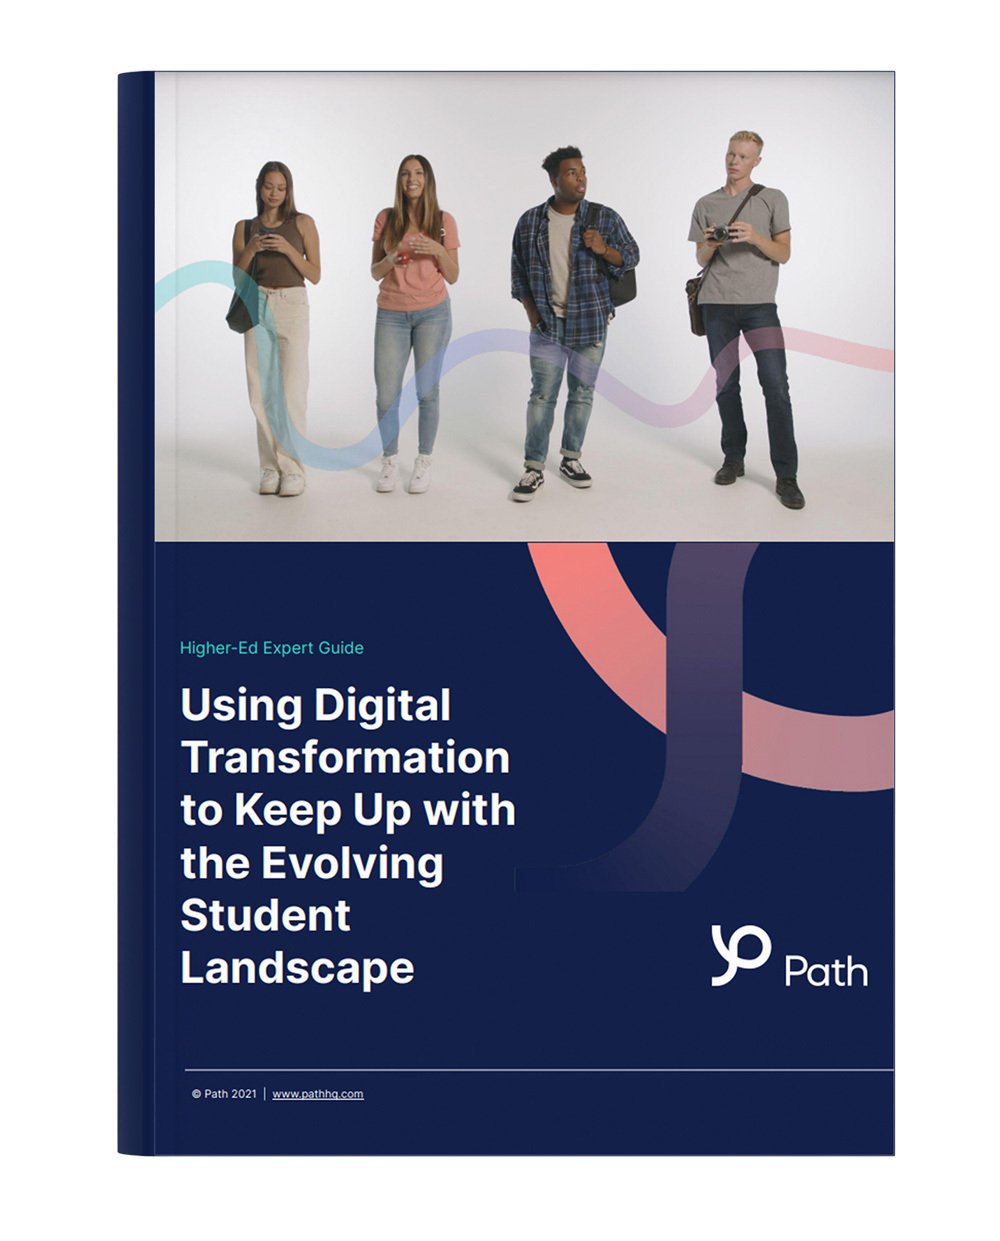 Using Digital Transformation to Keep Up with the Evolving Student Landscape